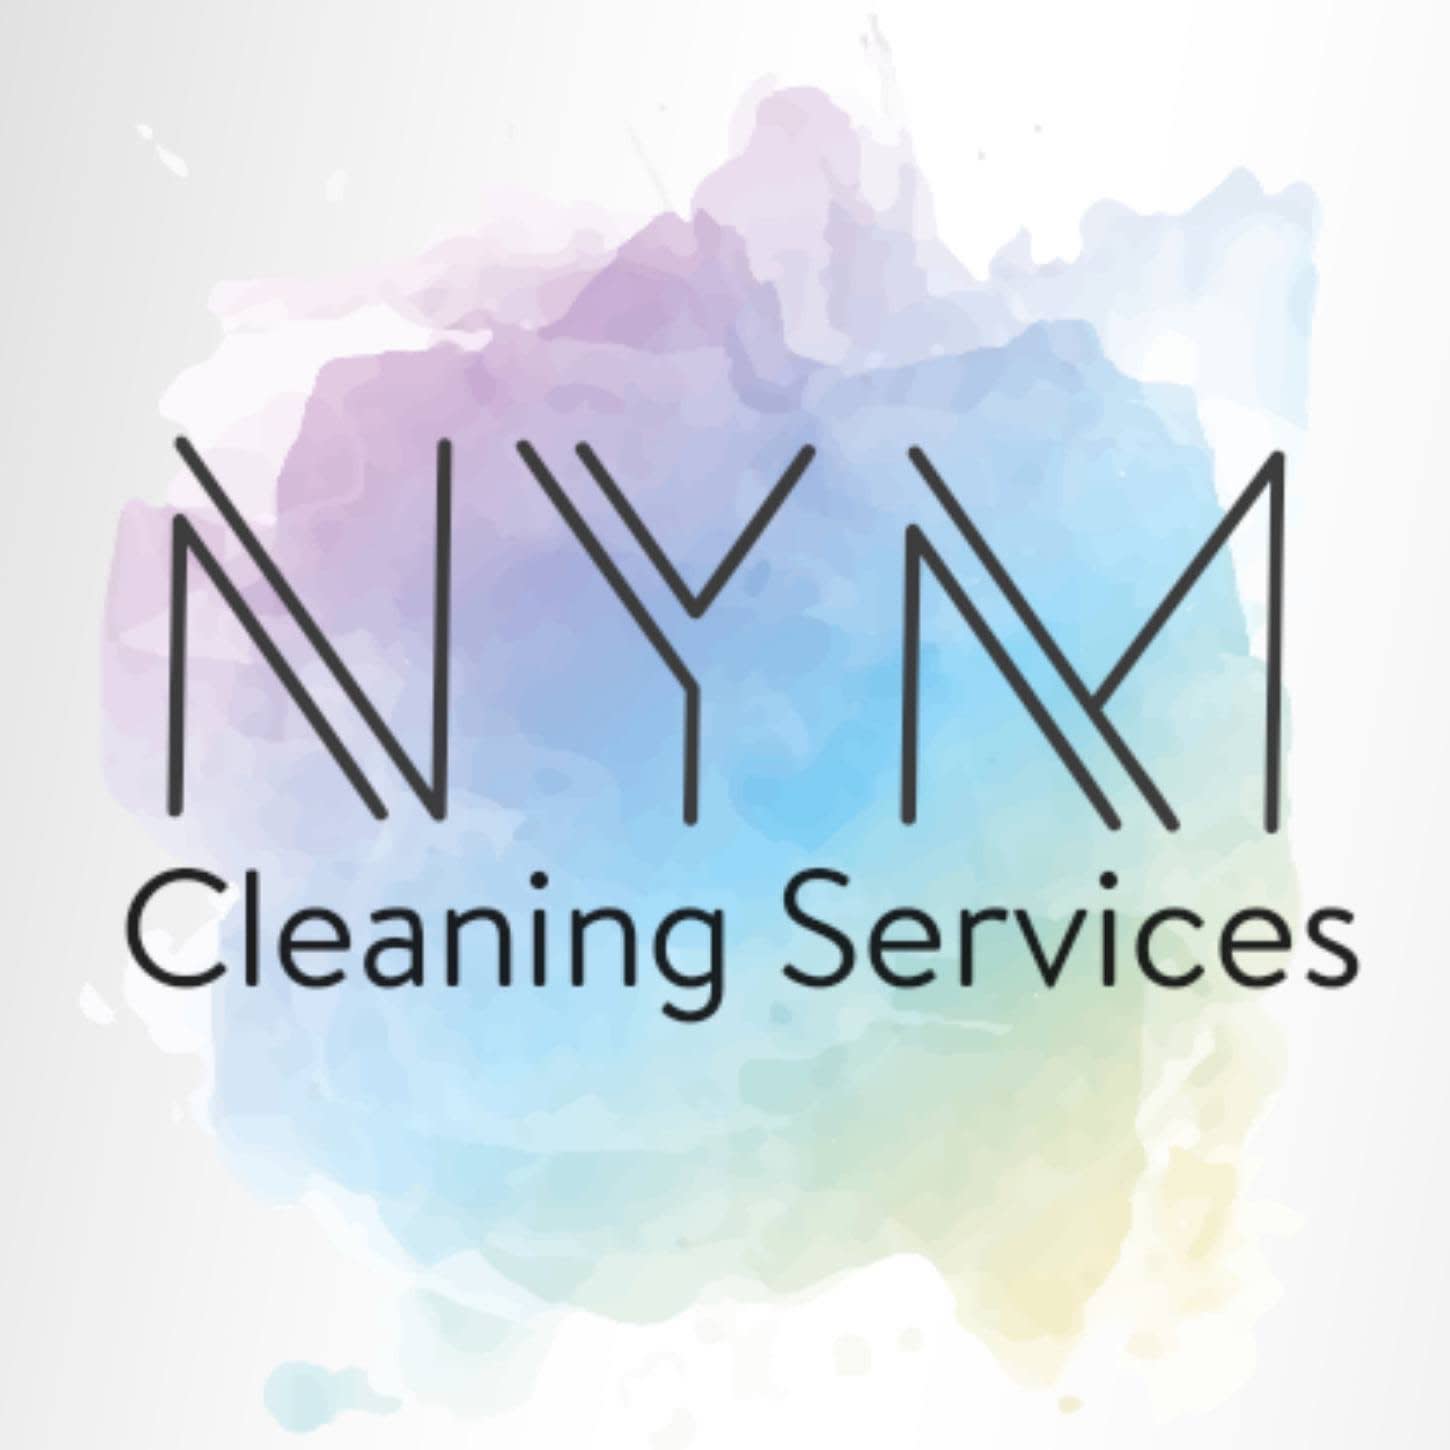 NYM Cleaning Services